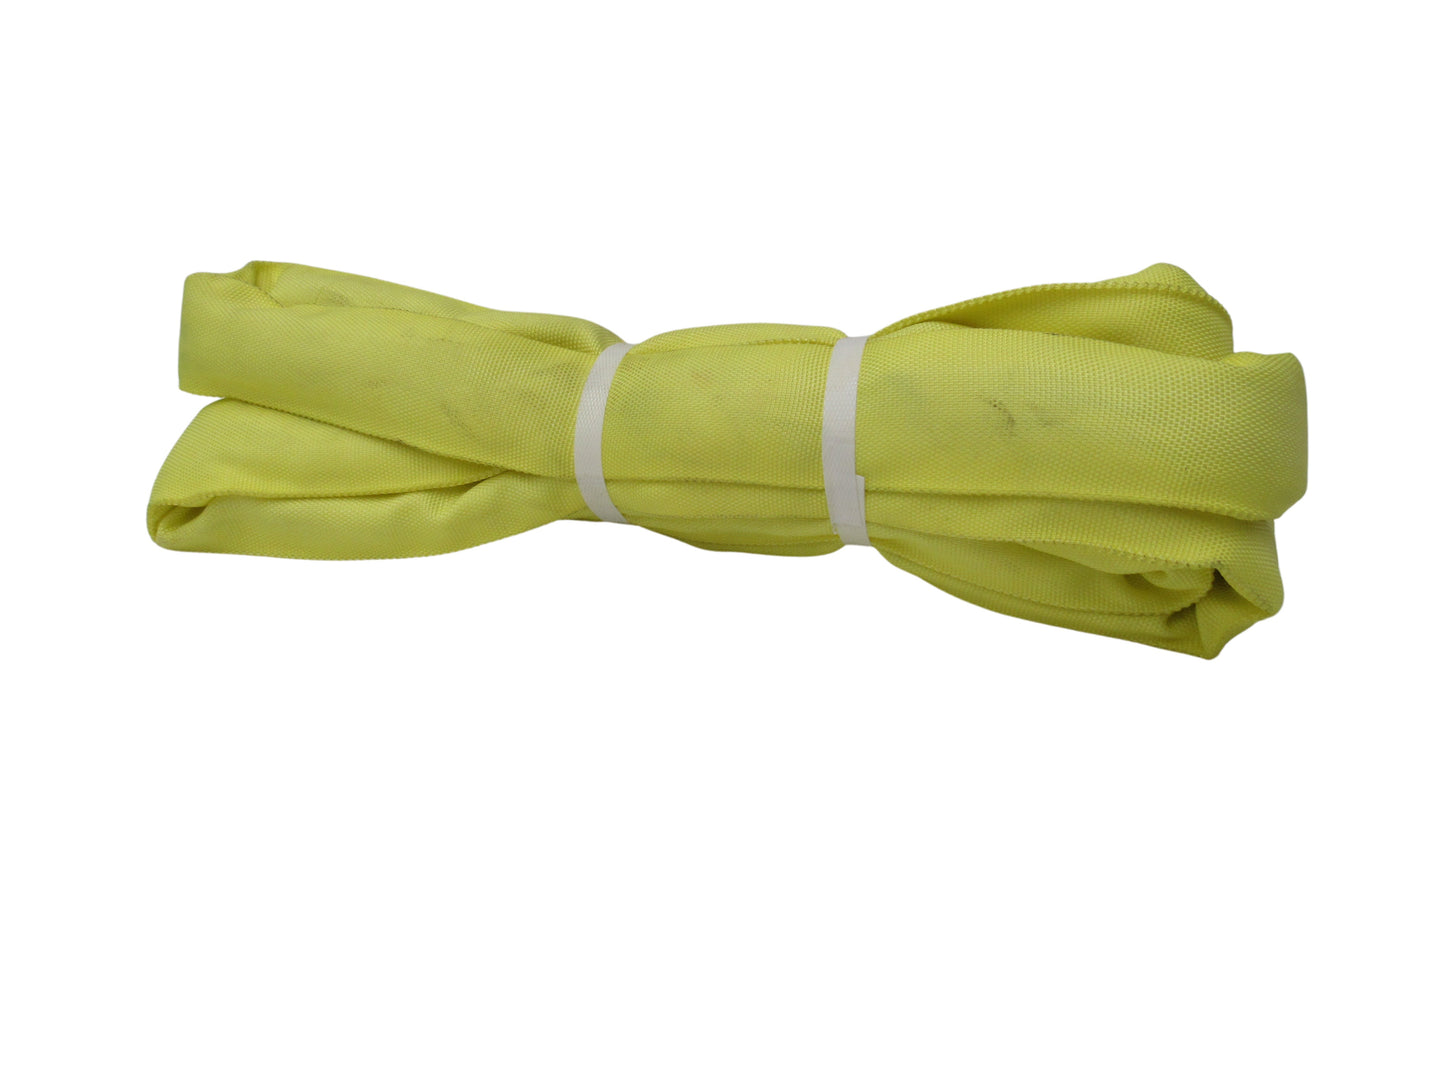 SWG 90 X 3' YL ROUND SLING 3' YELLOW***MADE IN USA